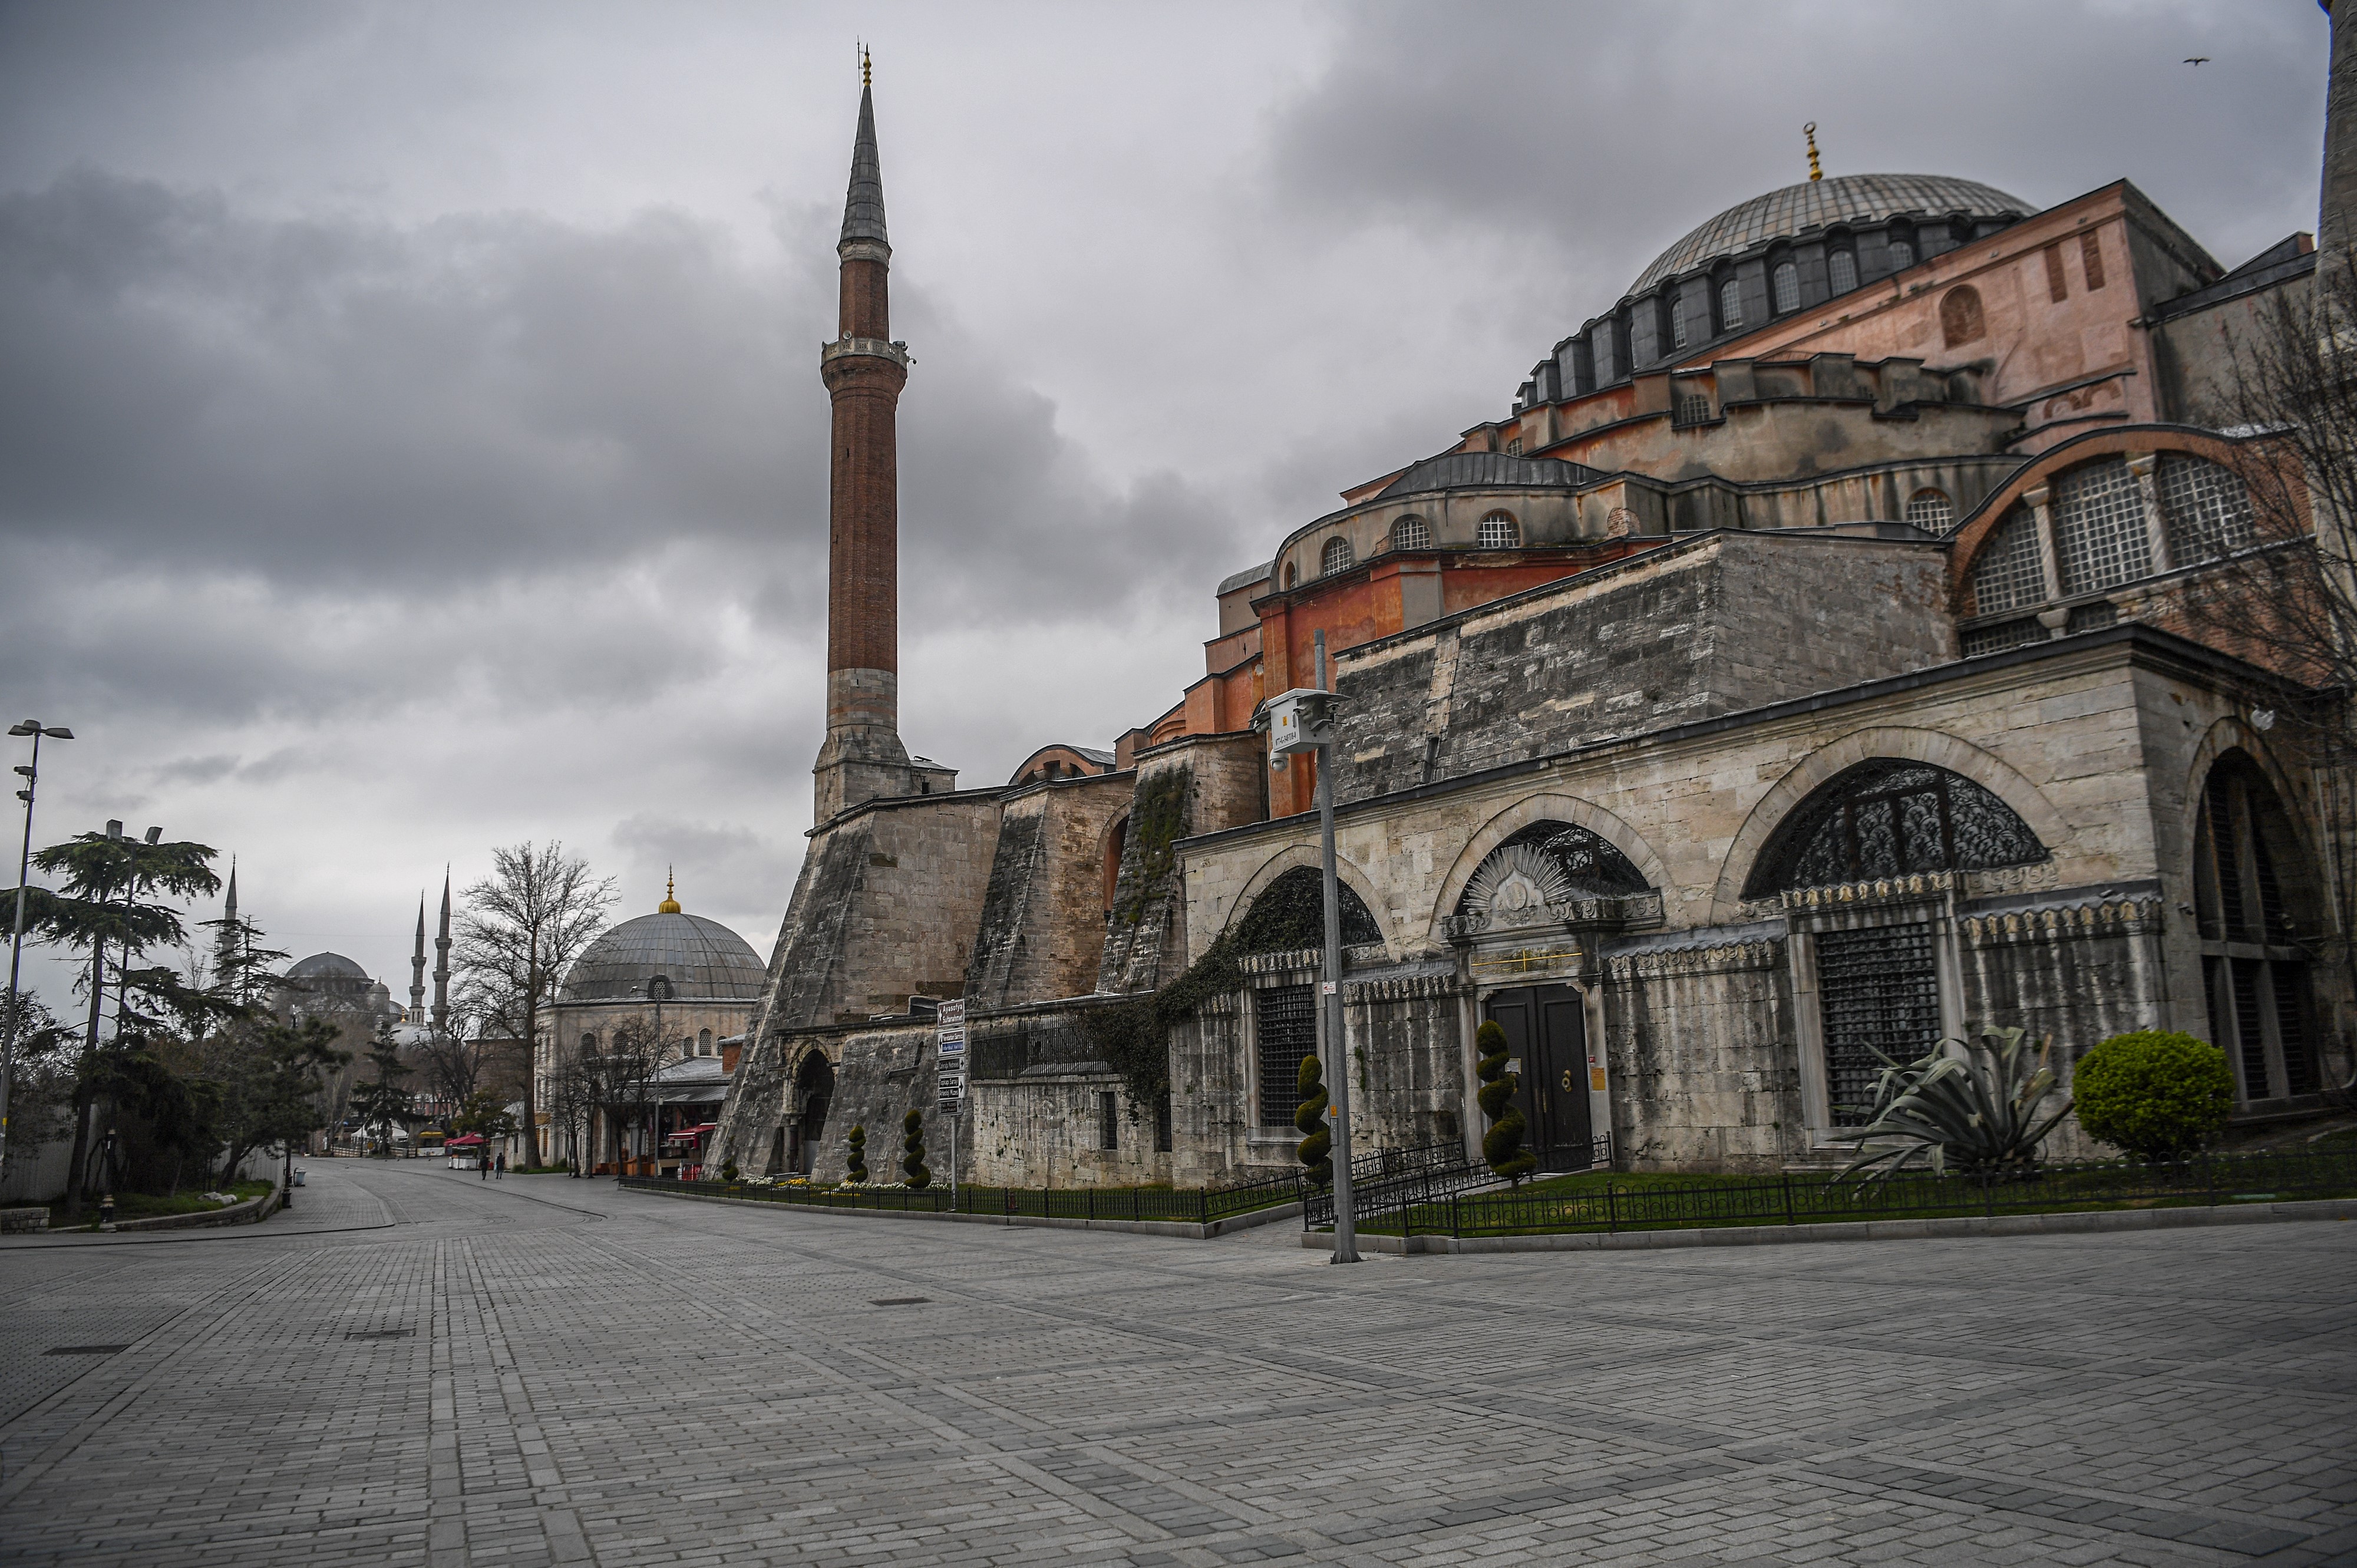 A picture taken on April 1, 2020 shows the empty streets by the iconic Hagia Sophia in Istanbul after Turkish officials have repeatedly urged citizens to stay home and respect social distancing rules. - More than 200 people have died from COVID-19 (the novel coronavirus) in Turkey, which has ramped up tests to more than 15,000 a day, Turkish Health Minister announced on March 31, 2020. (Photo by OZAN KOSE/AFP via Getty Images)